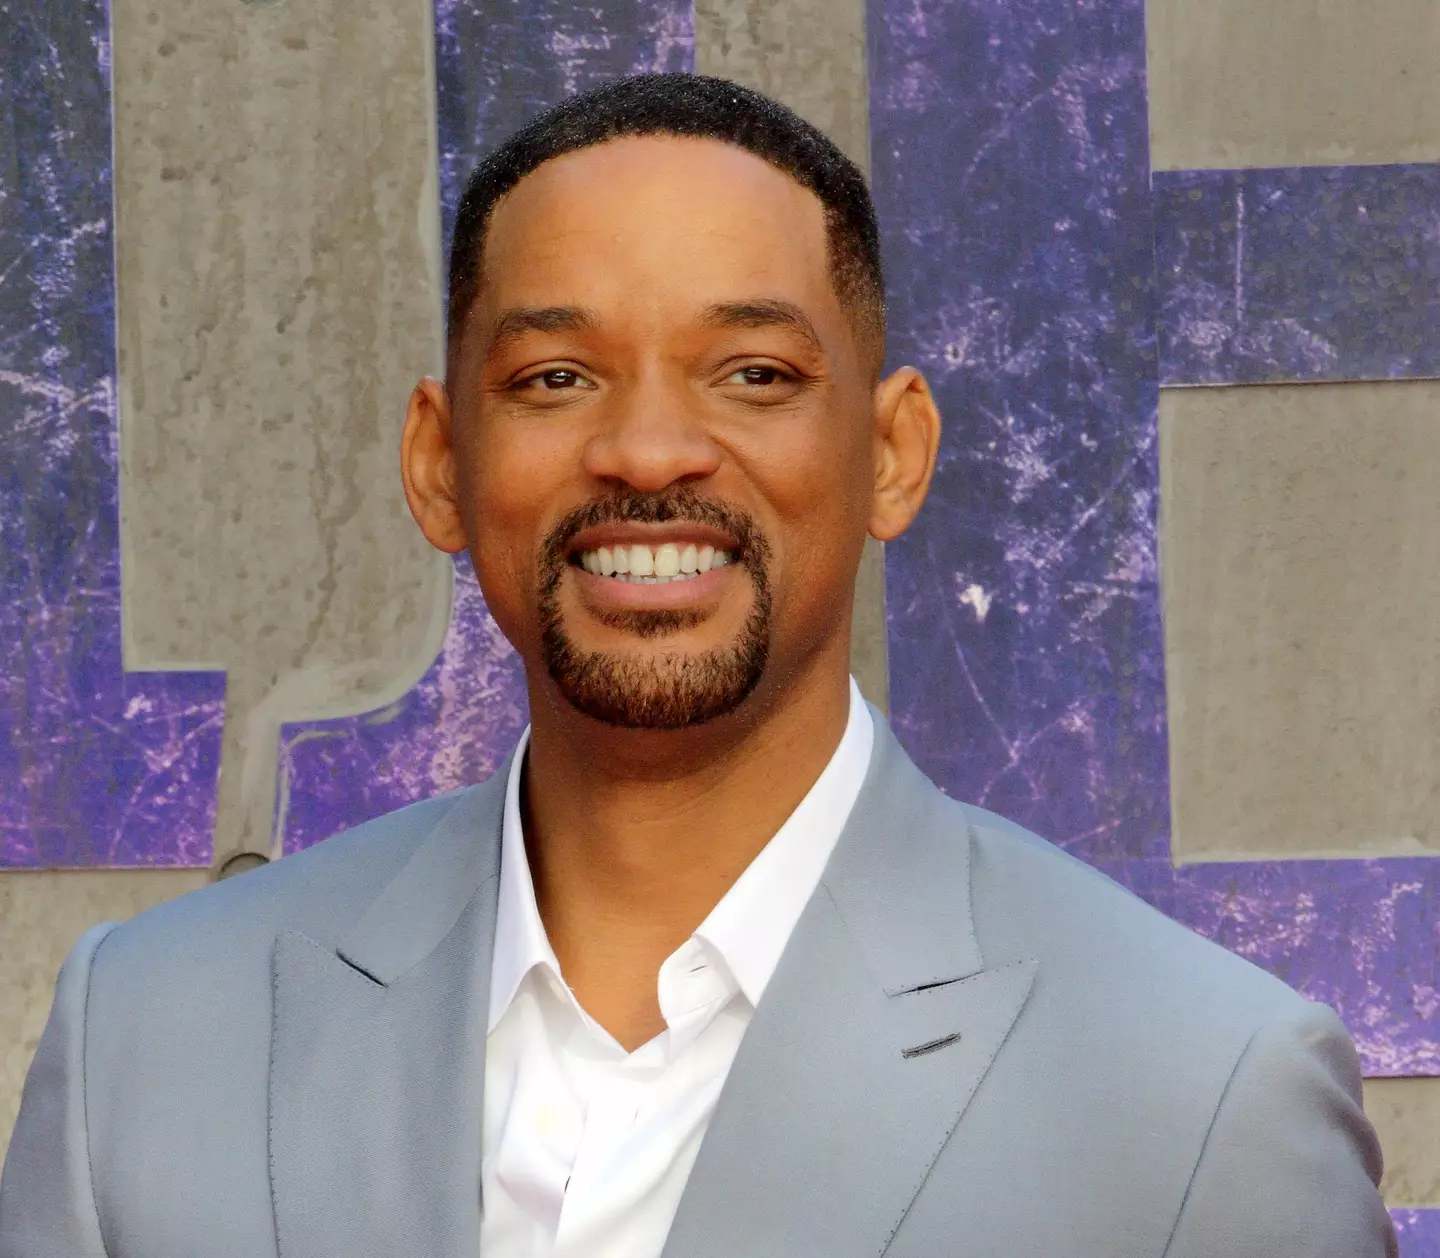 Will Smith has since apologised for the slap.